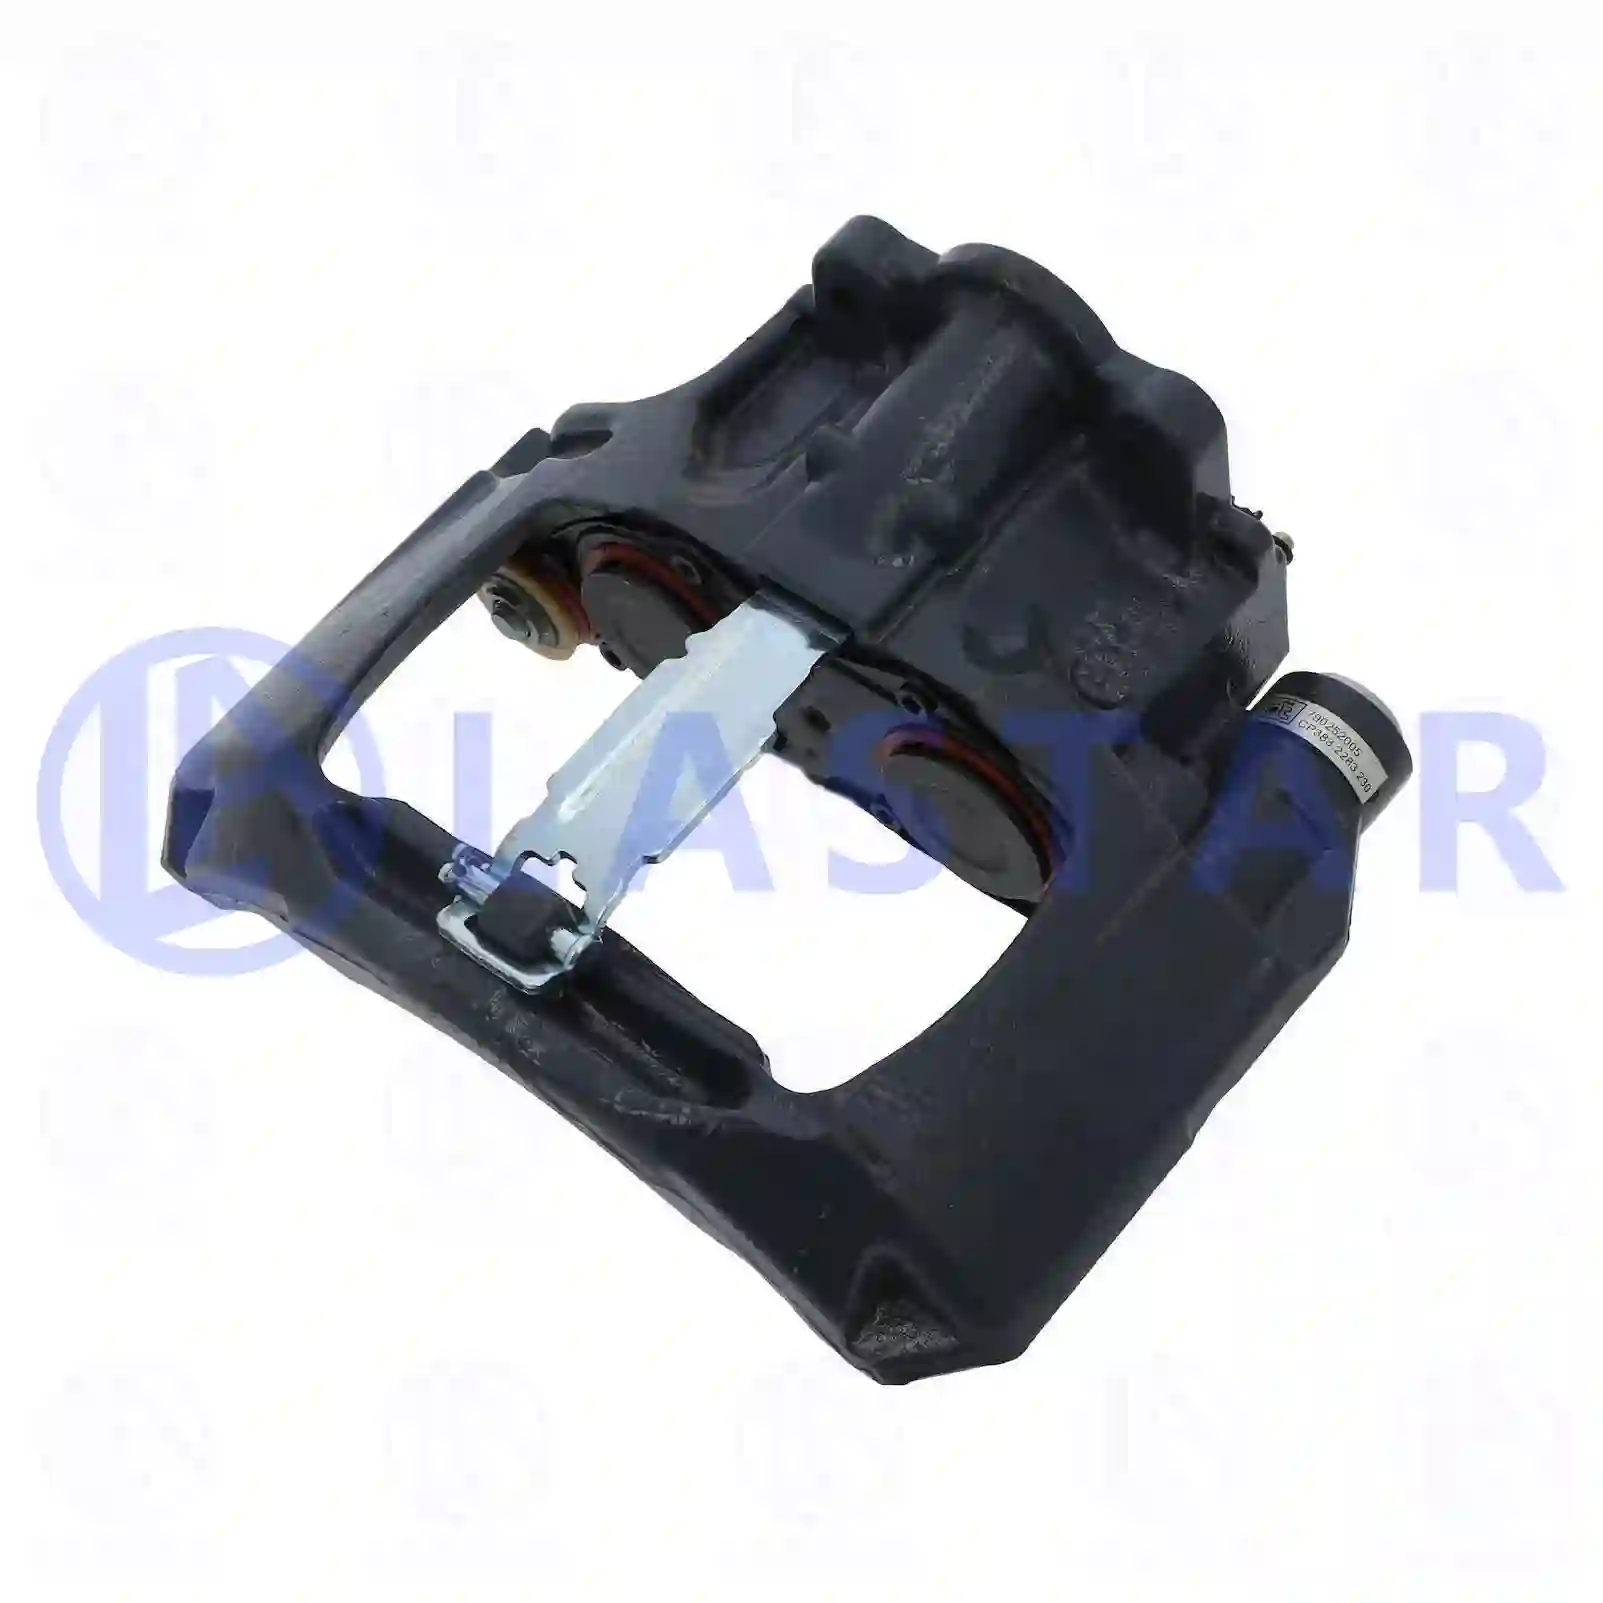 Brake caliper, right, reman. / without old core, 77714027, 0536270620, 0536270621, 0536270700, 0536270701, JAE0250409283, 0034209283, 0054202683, 9464202301, 3080005420, 3080006000, 3080006001, 3080006020 ||  77714027 Lastar Spare Part | Truck Spare Parts, Auotomotive Spare Parts Brake caliper, right, reman. / without old core, 77714027, 0536270620, 0536270621, 0536270700, 0536270701, JAE0250409283, 0034209283, 0054202683, 9464202301, 3080005420, 3080006000, 3080006001, 3080006020 ||  77714027 Lastar Spare Part | Truck Spare Parts, Auotomotive Spare Parts